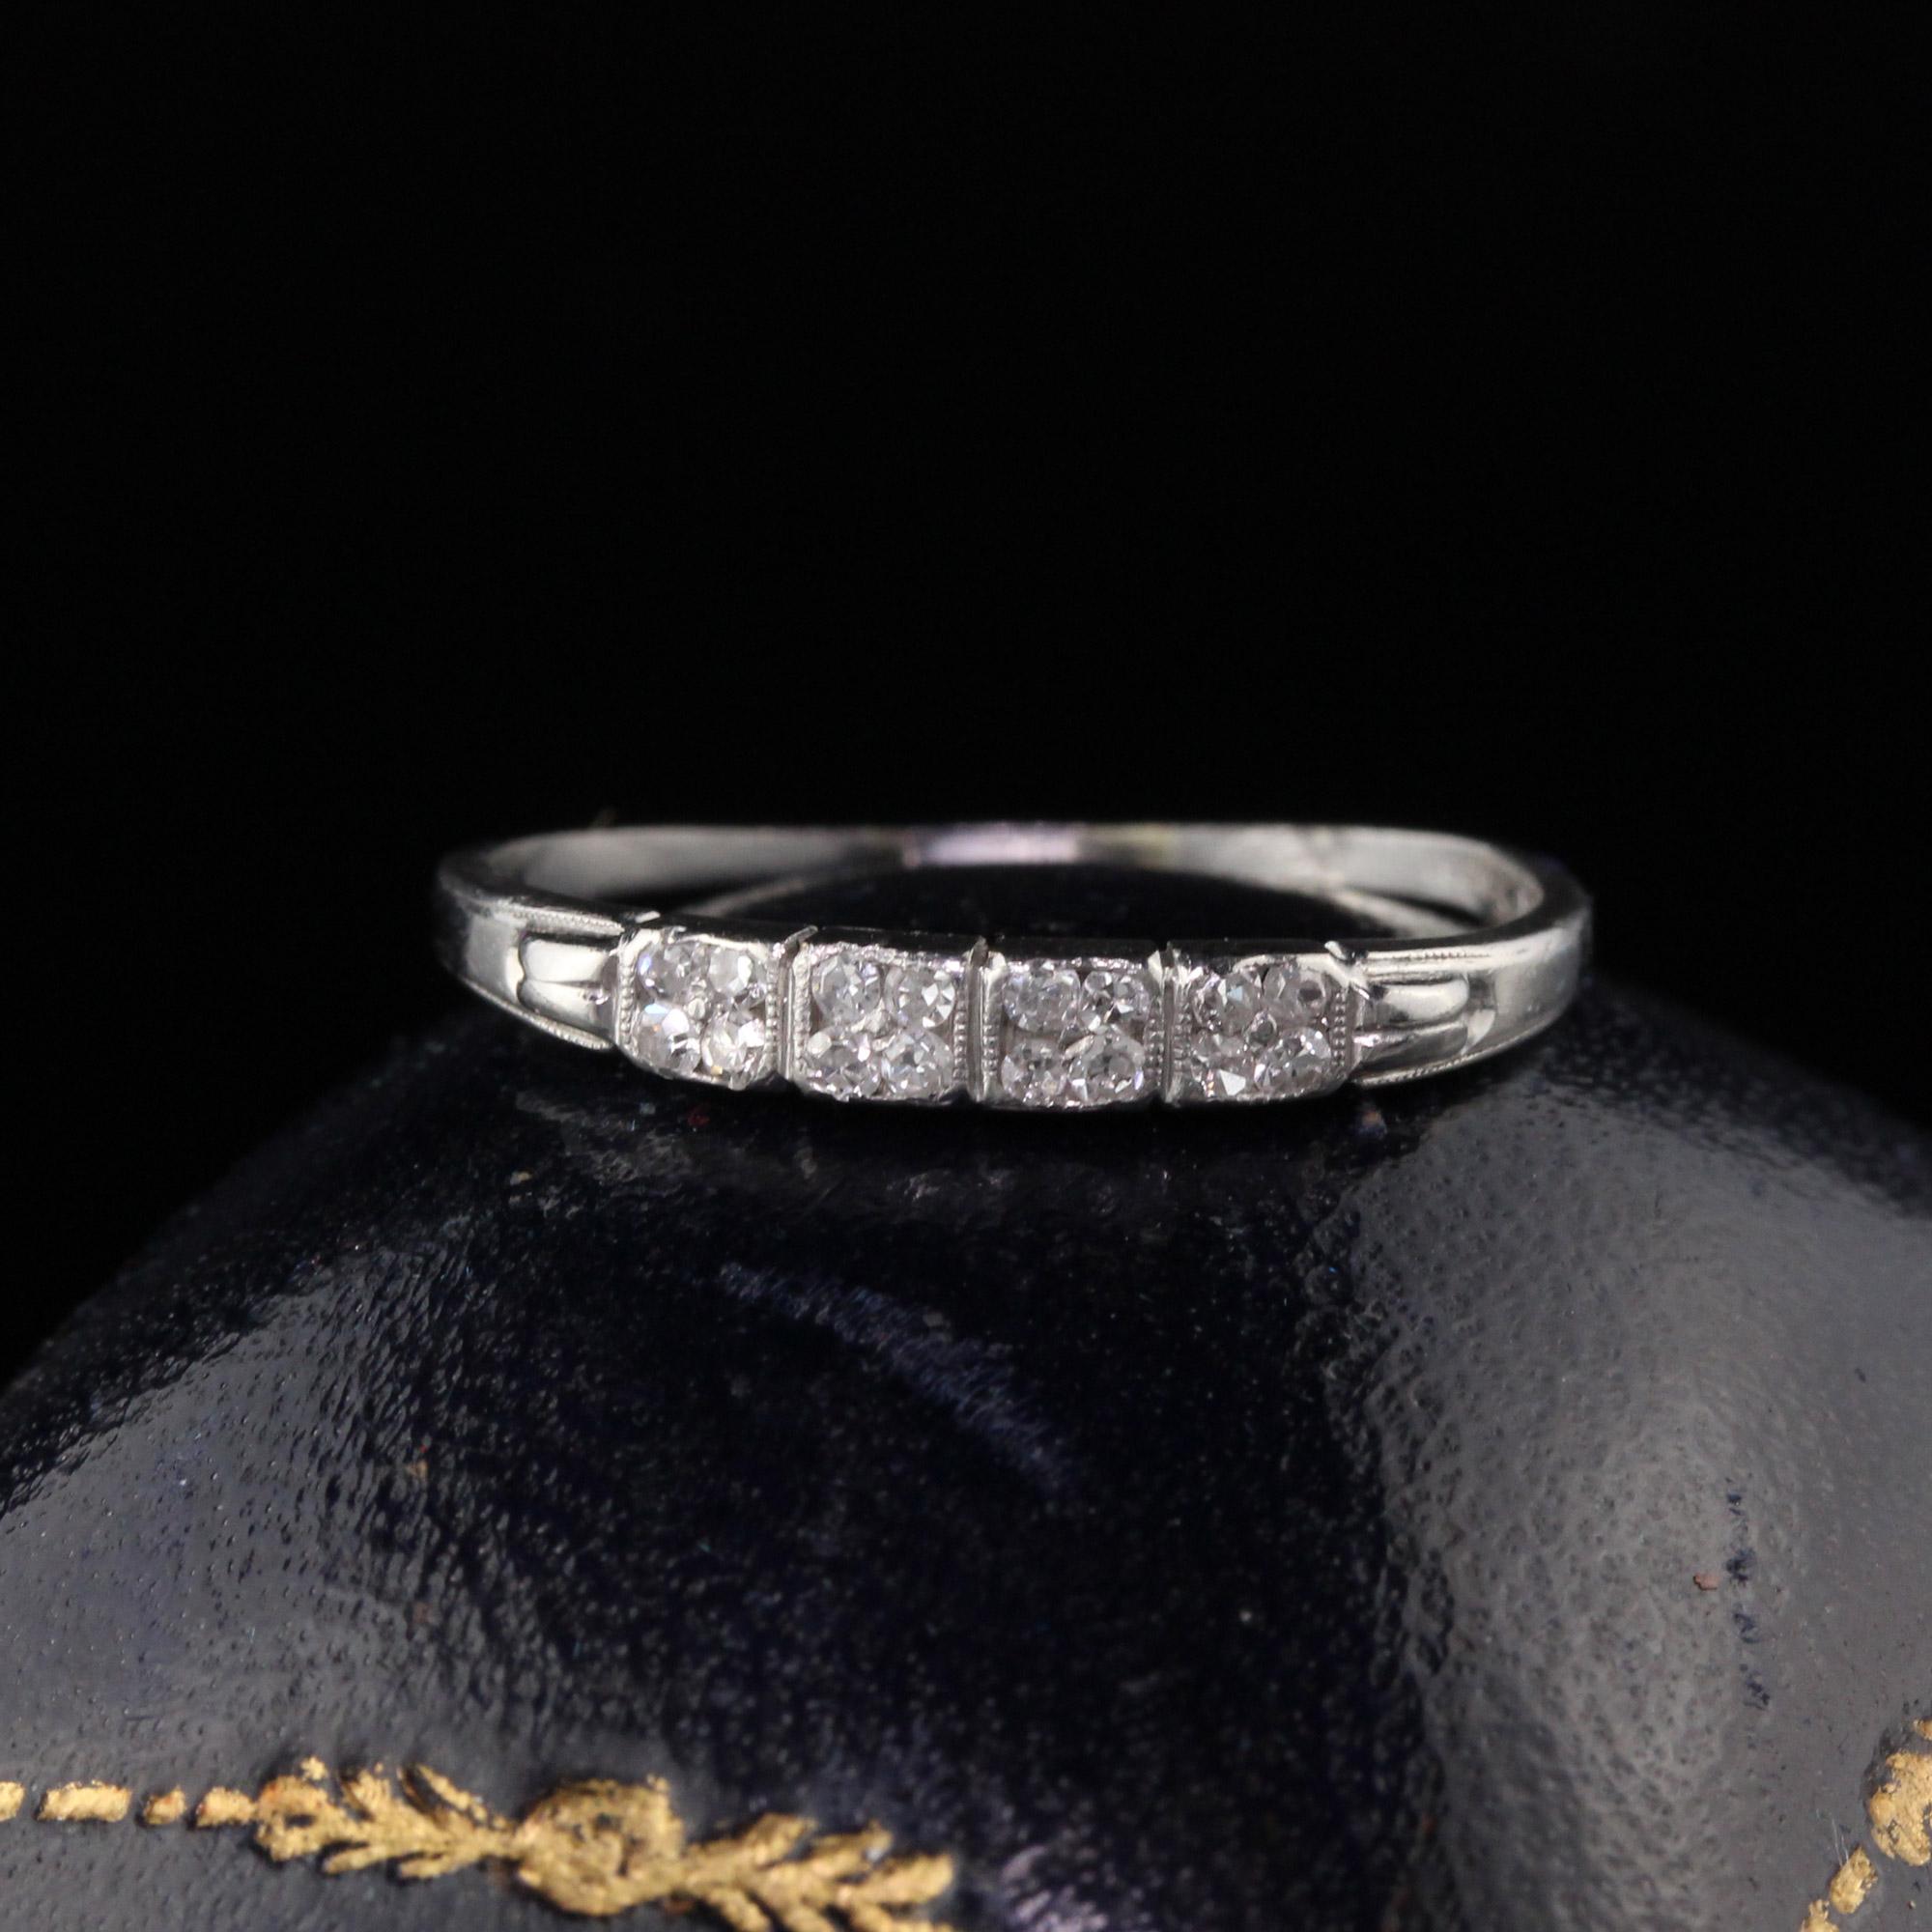 Perfect Art Deco Platinum half eternity band with 4 clusters of 4 single cut diamonds creating the illusion of 4 larger diamonds. 10%IRID Platinum is marked inside the shank. Unisex!

#R0312

Metal: Platinum

Weight: 1.9 Grams

Total Diamond Weight: